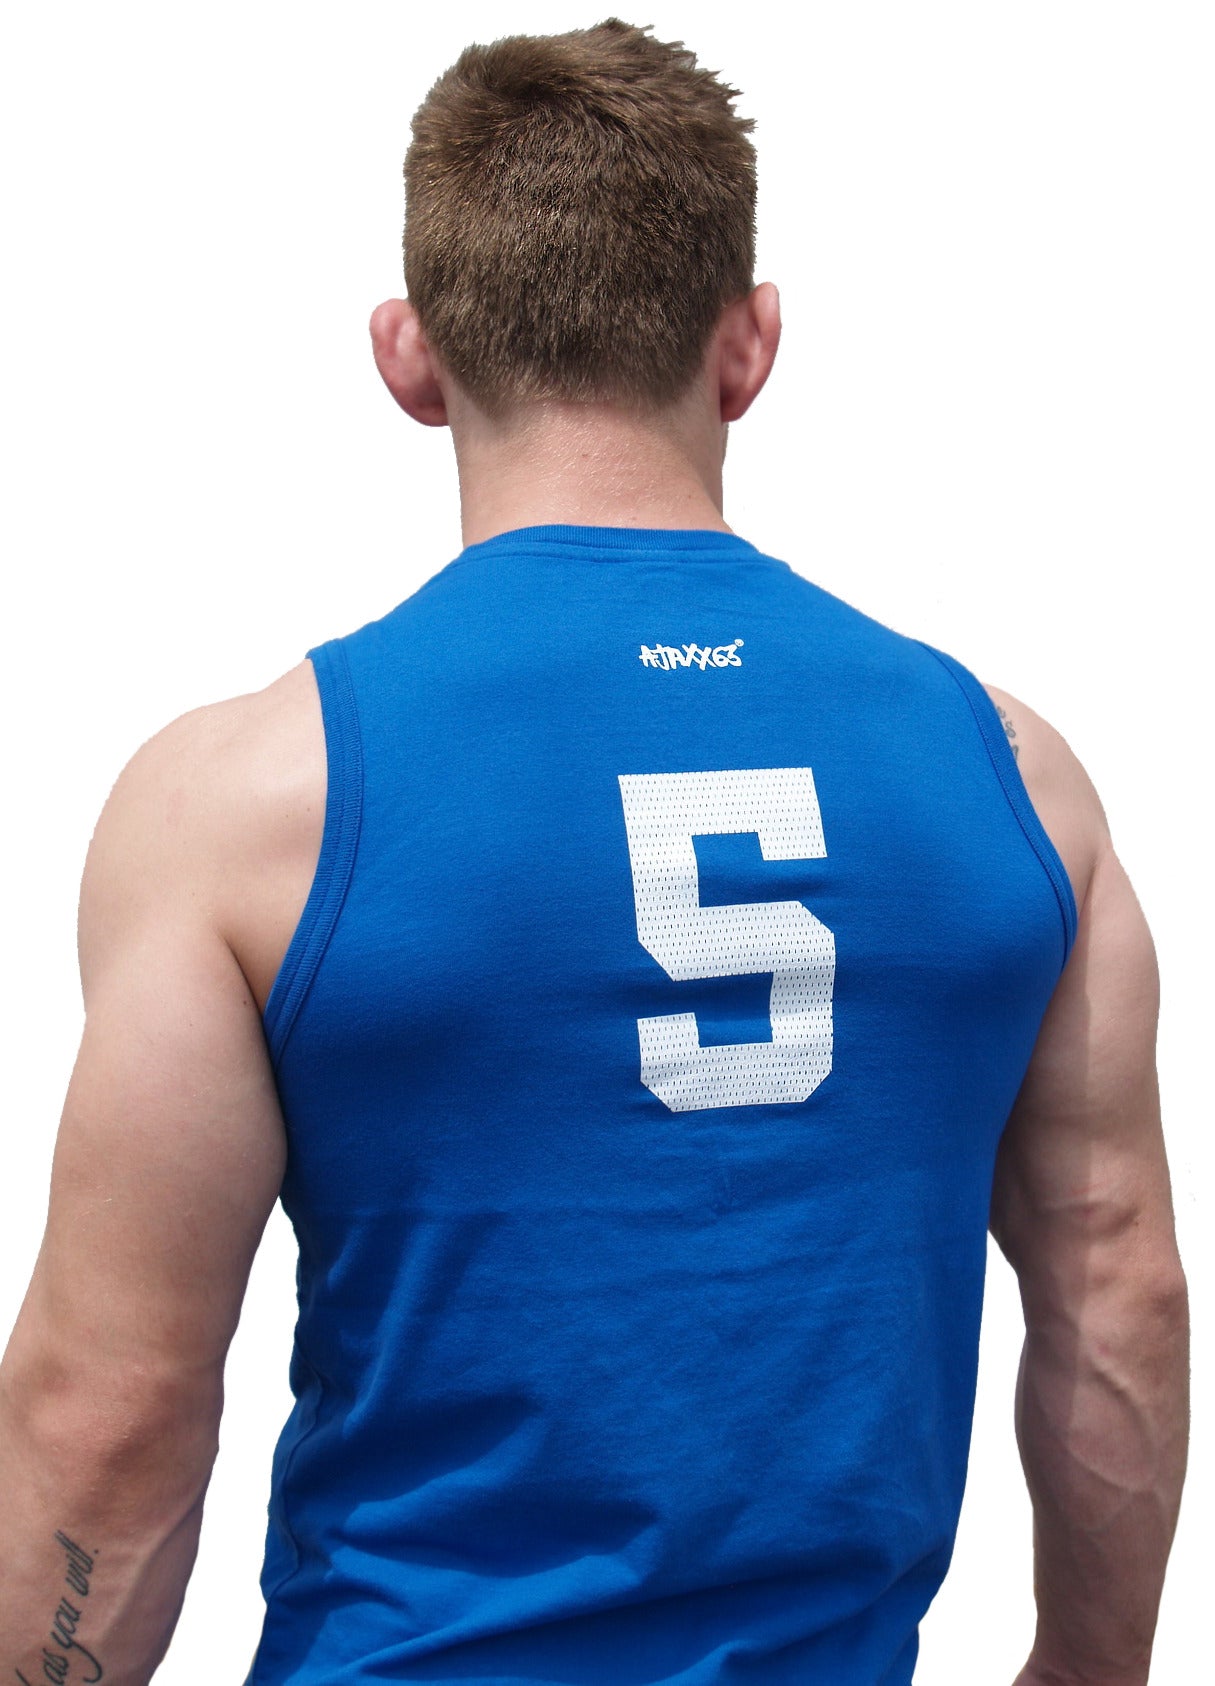 M.E.A. Track Sleeveless Athletic Fit